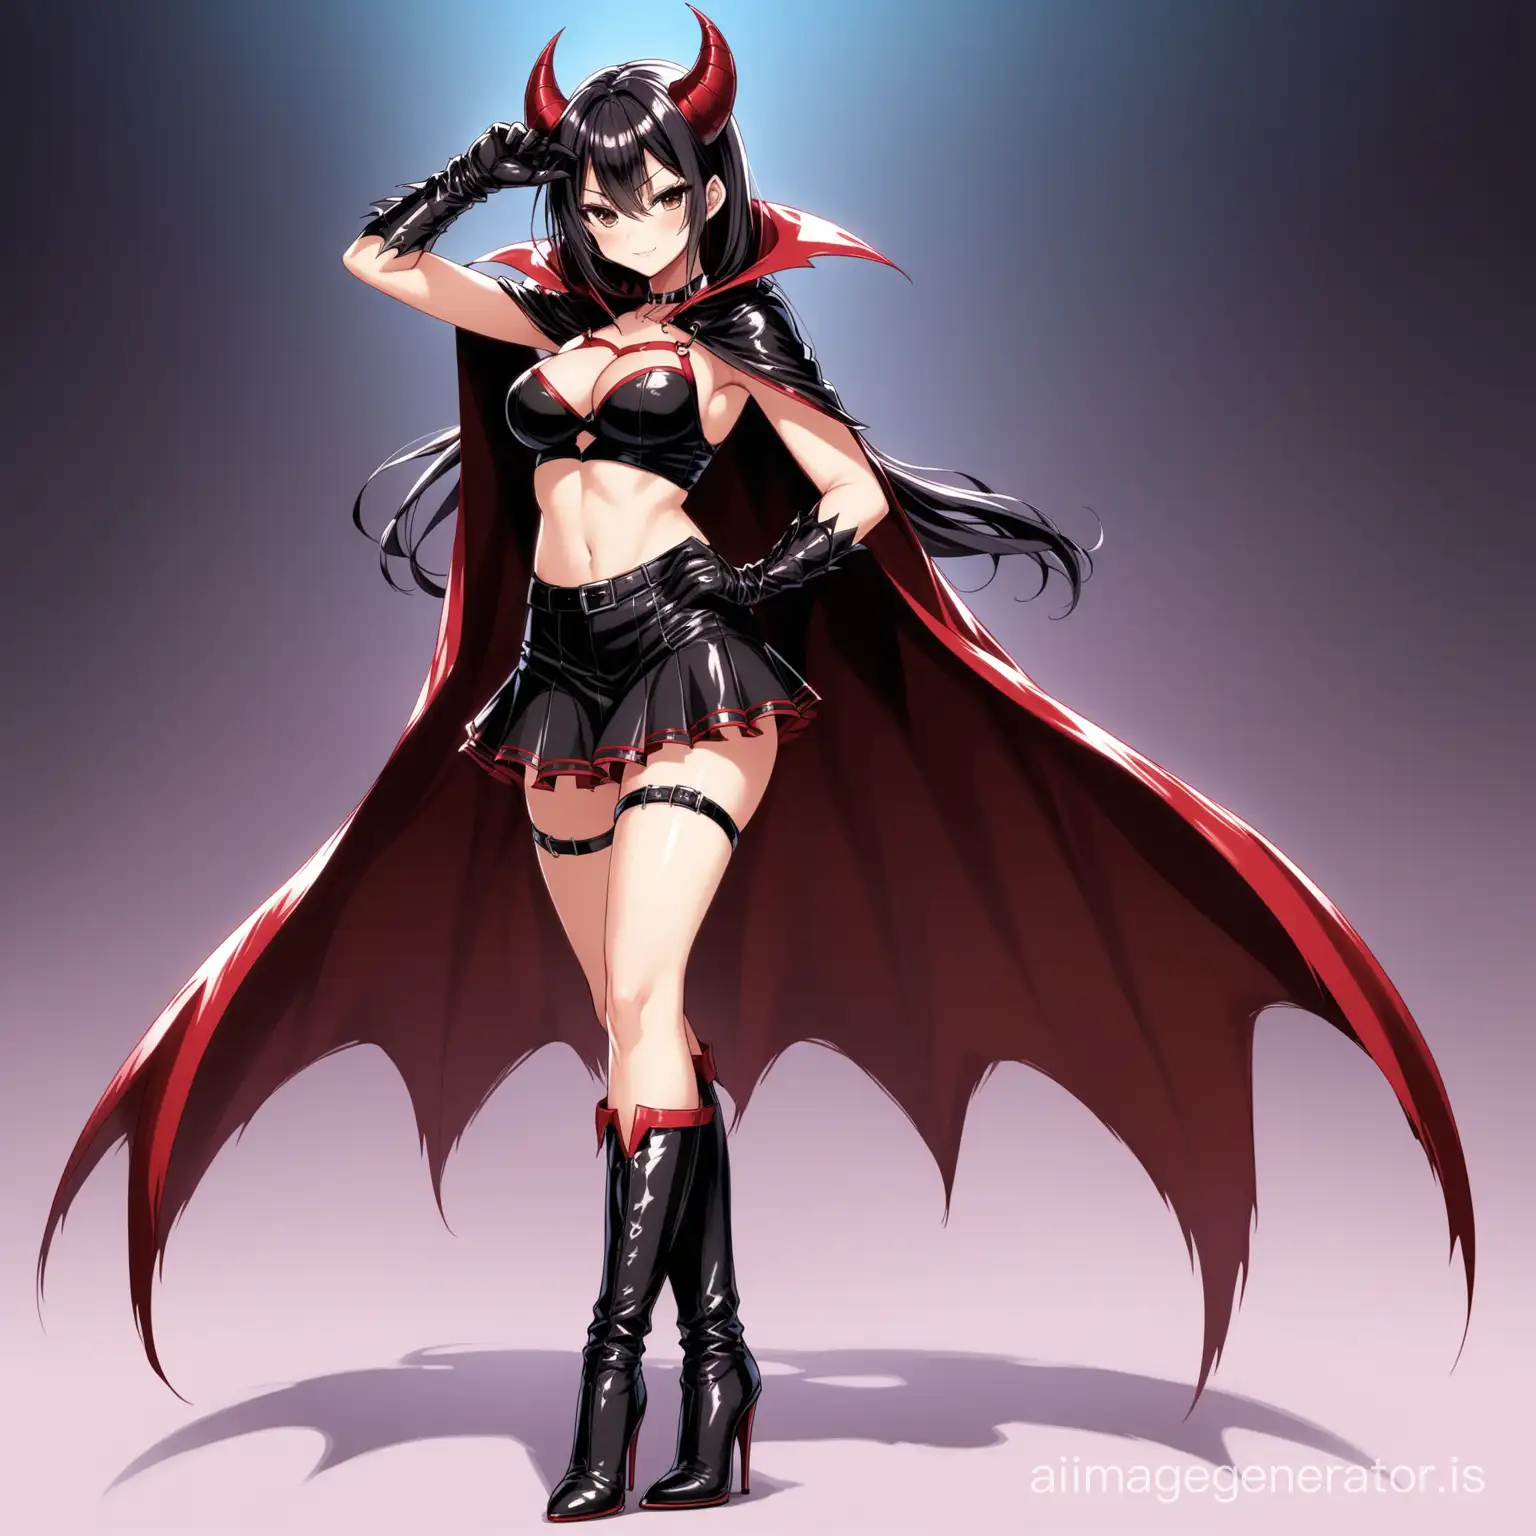 Seductive-Anime-Demoness-in-Leather-Boots-and-Cape